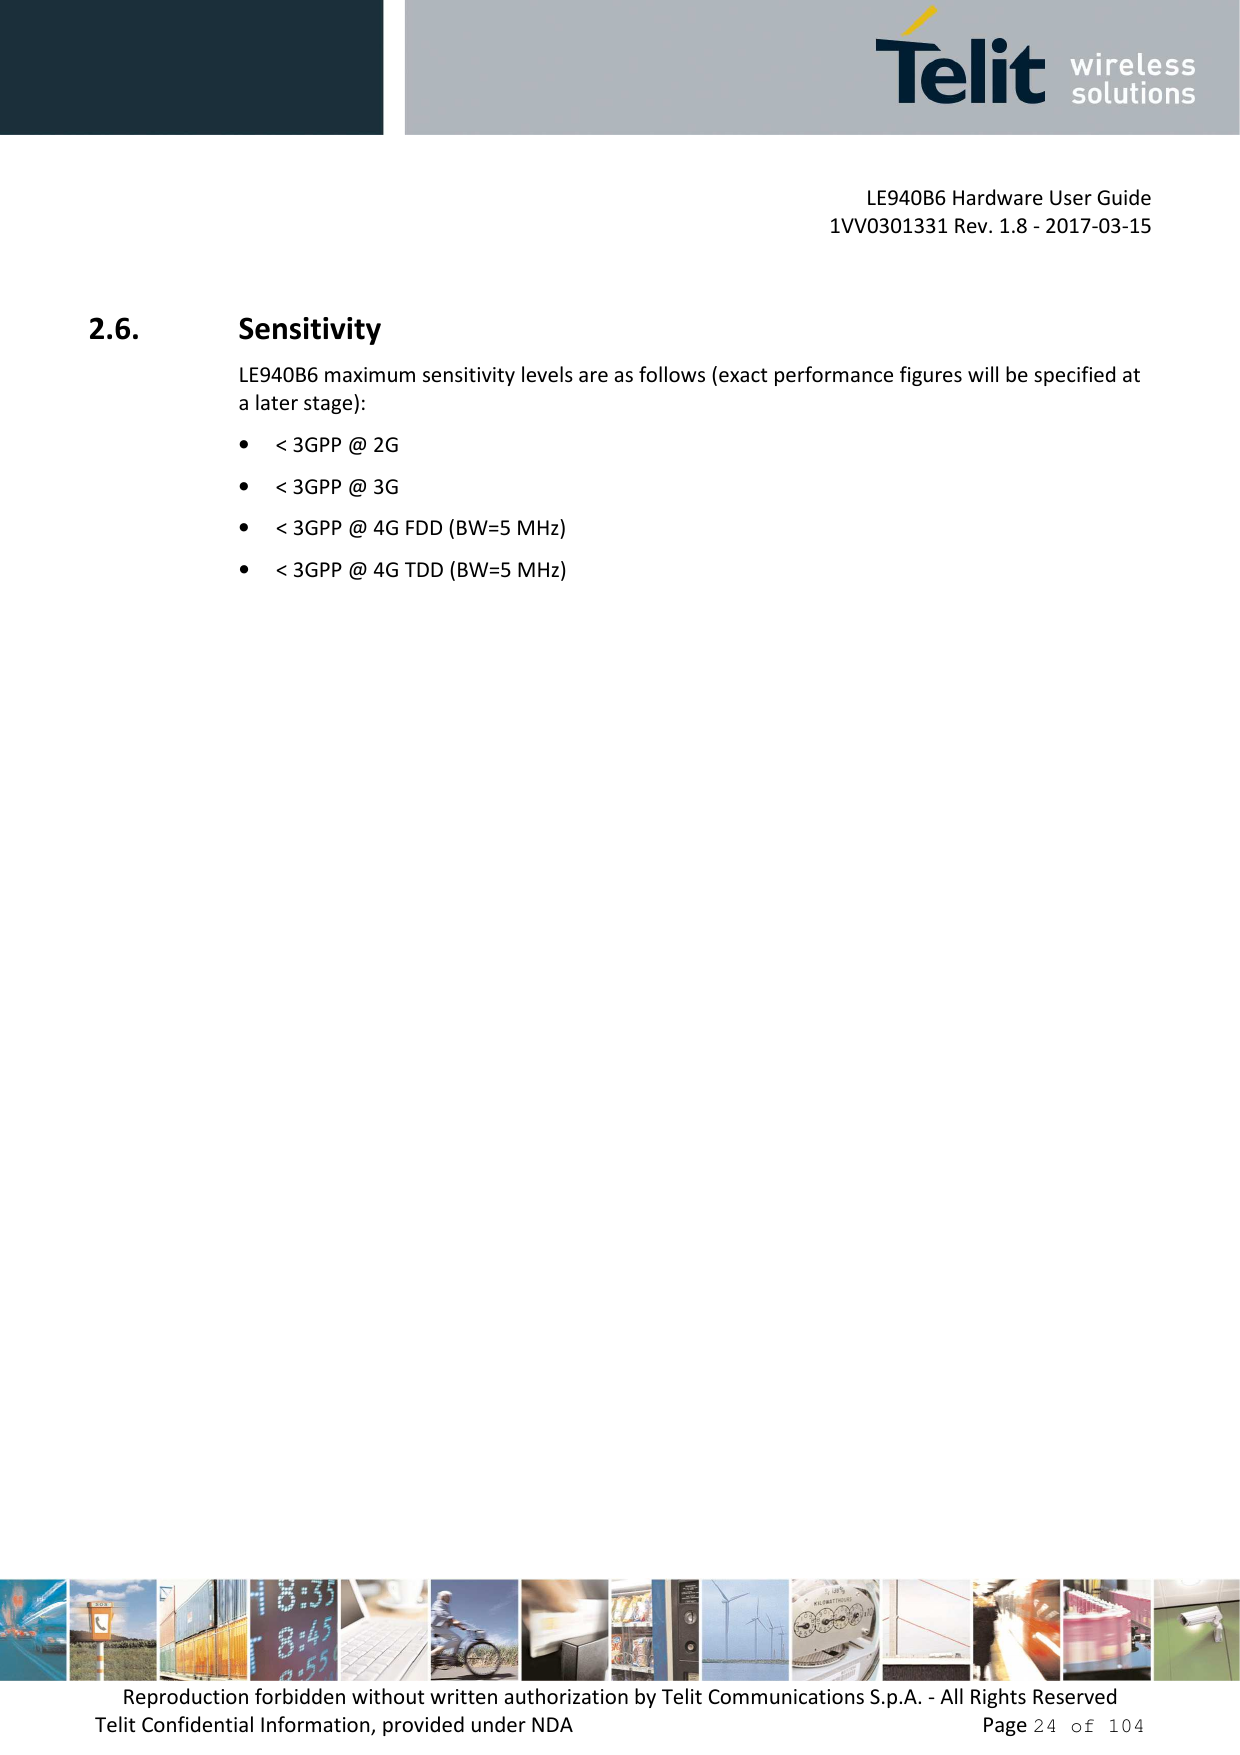         LE940B6 Hardware User Guide     1VV0301331 Rev. 1.8 - 2017-03-15 Reproduction forbidden without written authorization by Telit Communications S.p.A. - All Rights Reserved Telit Confidential Information, provided under NDA                 Page 24 of 104  2.6. Sensitivity LE940B6 maximum sensitivity levels are as follows (exact performance figures will be specified at a later stage):  • &lt; 3GPP @ 2G   • &lt; 3GPP @ 3G • &lt; 3GPP @ 4G FDD (BW=5 MHz) • &lt; 3GPP @ 4G TDD (BW=5 MHz)     